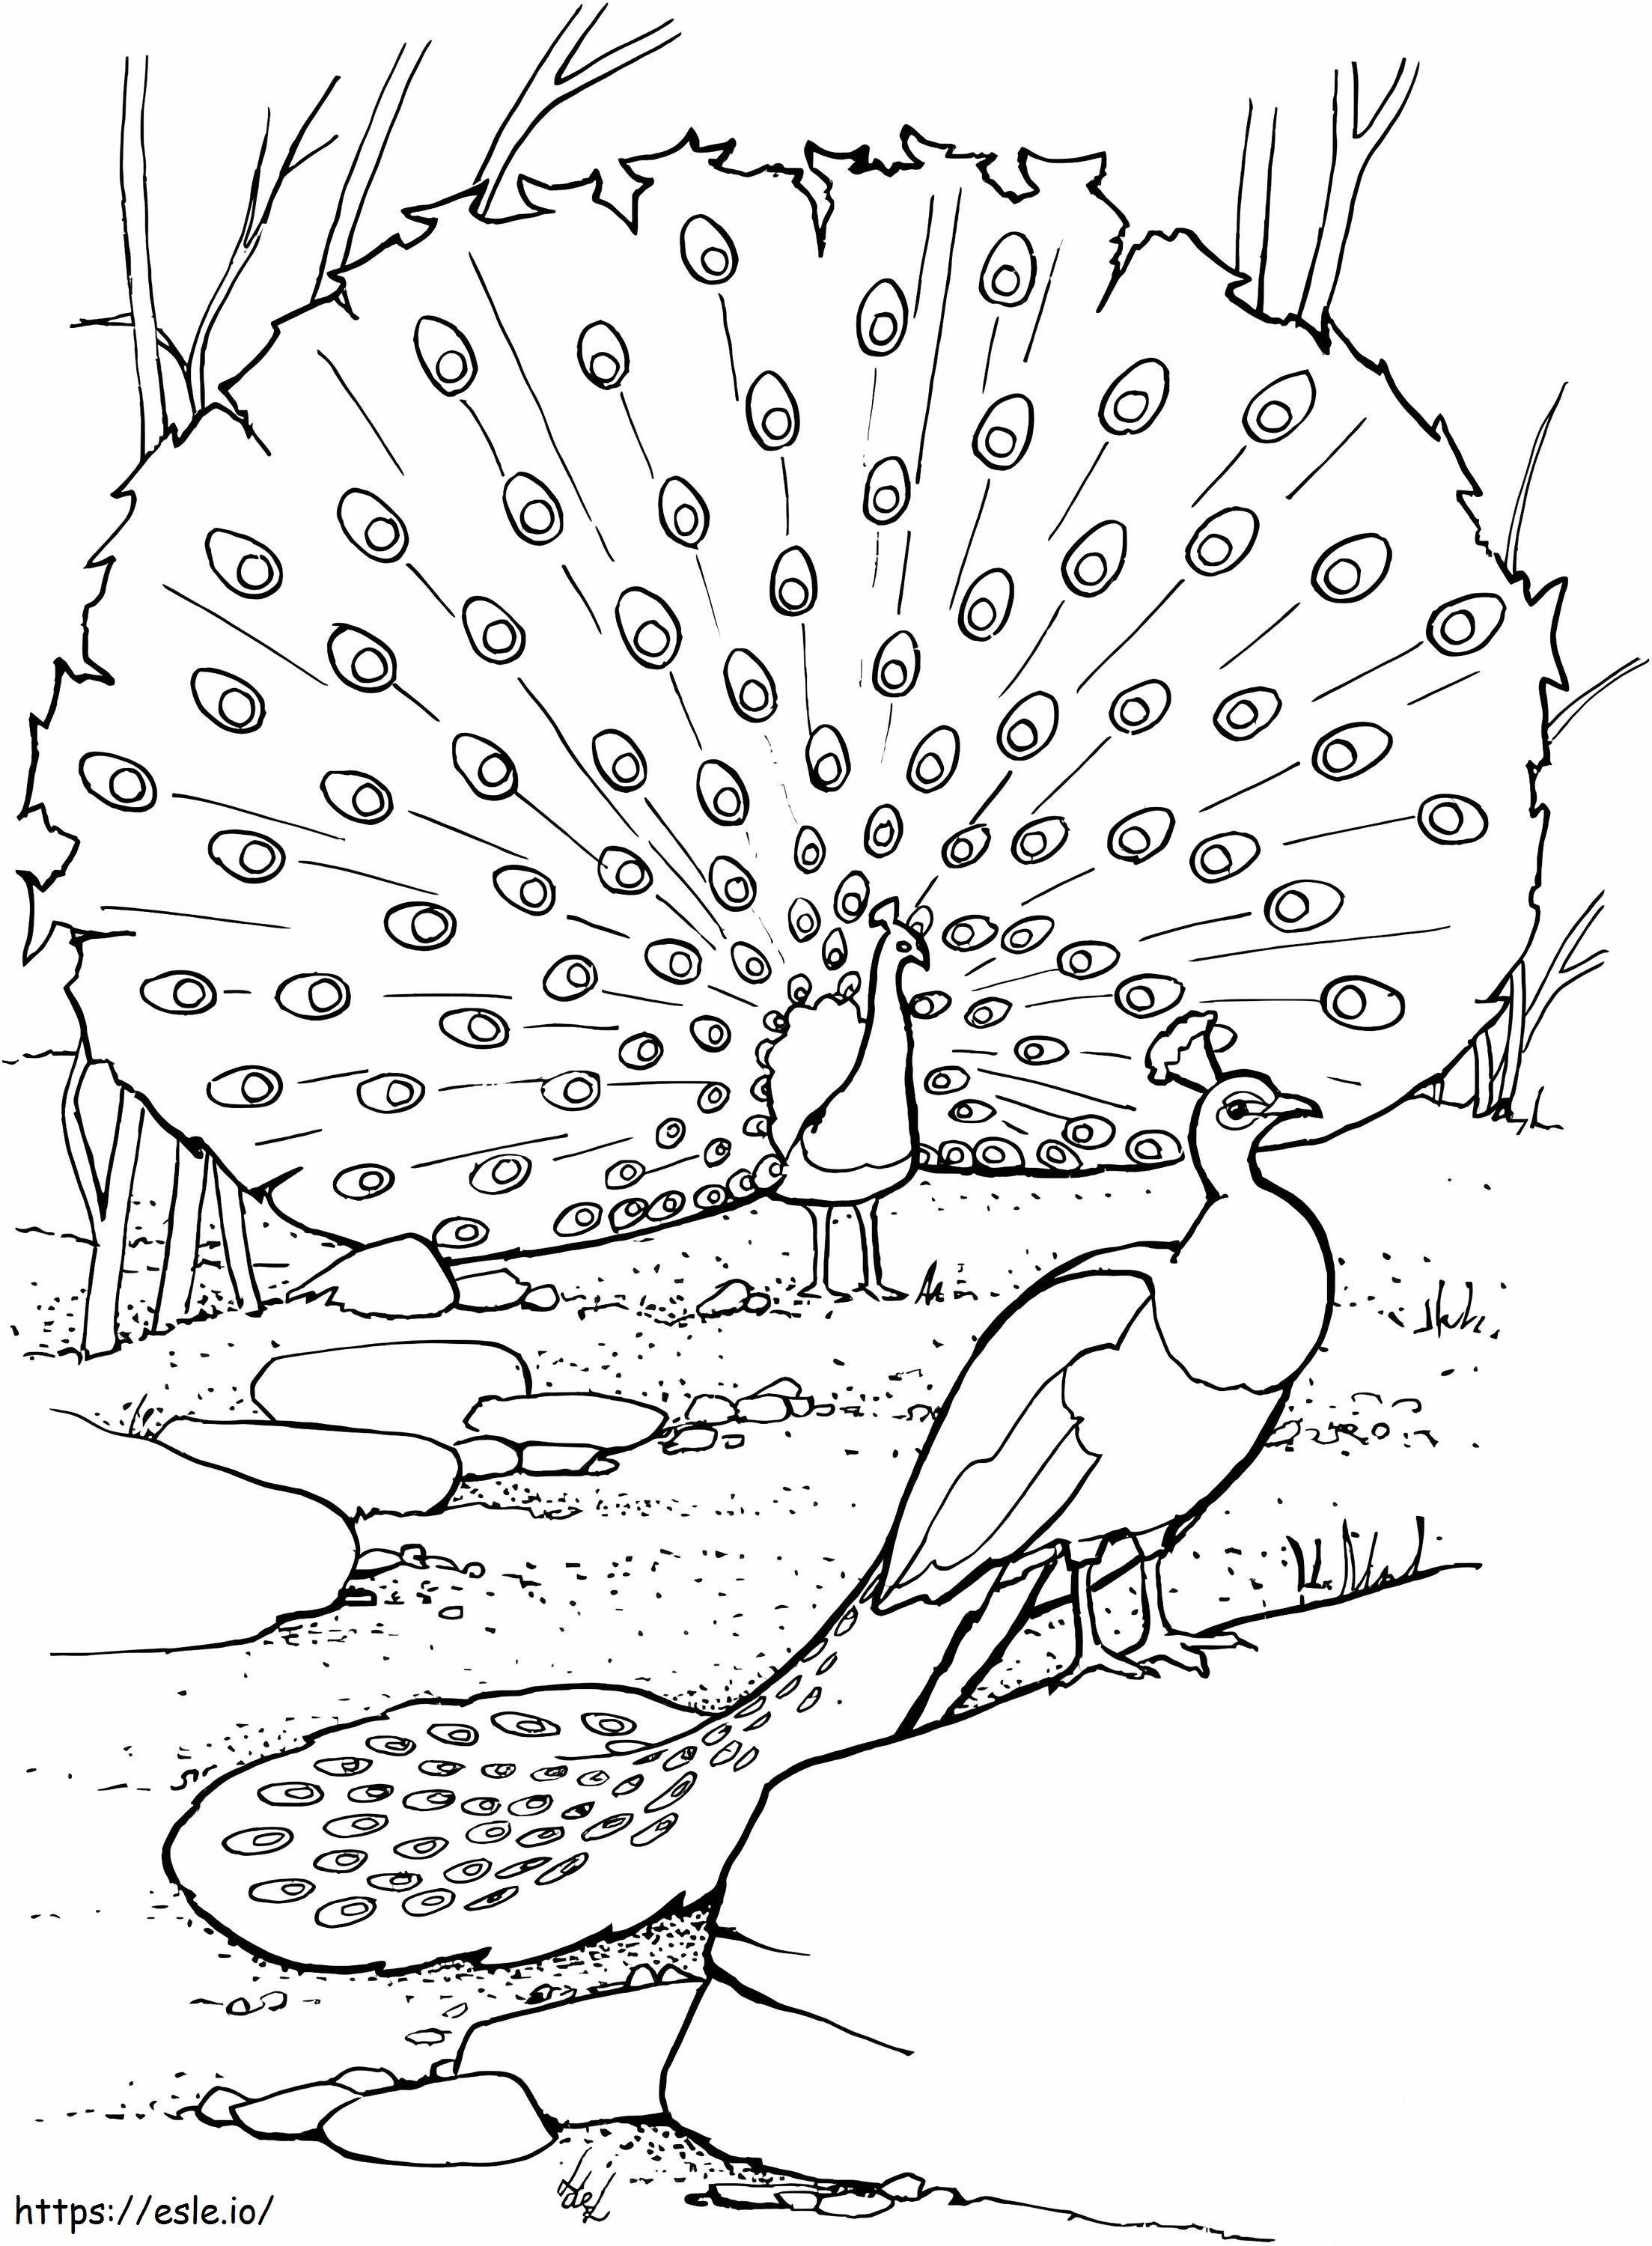 Peacocks coloring page